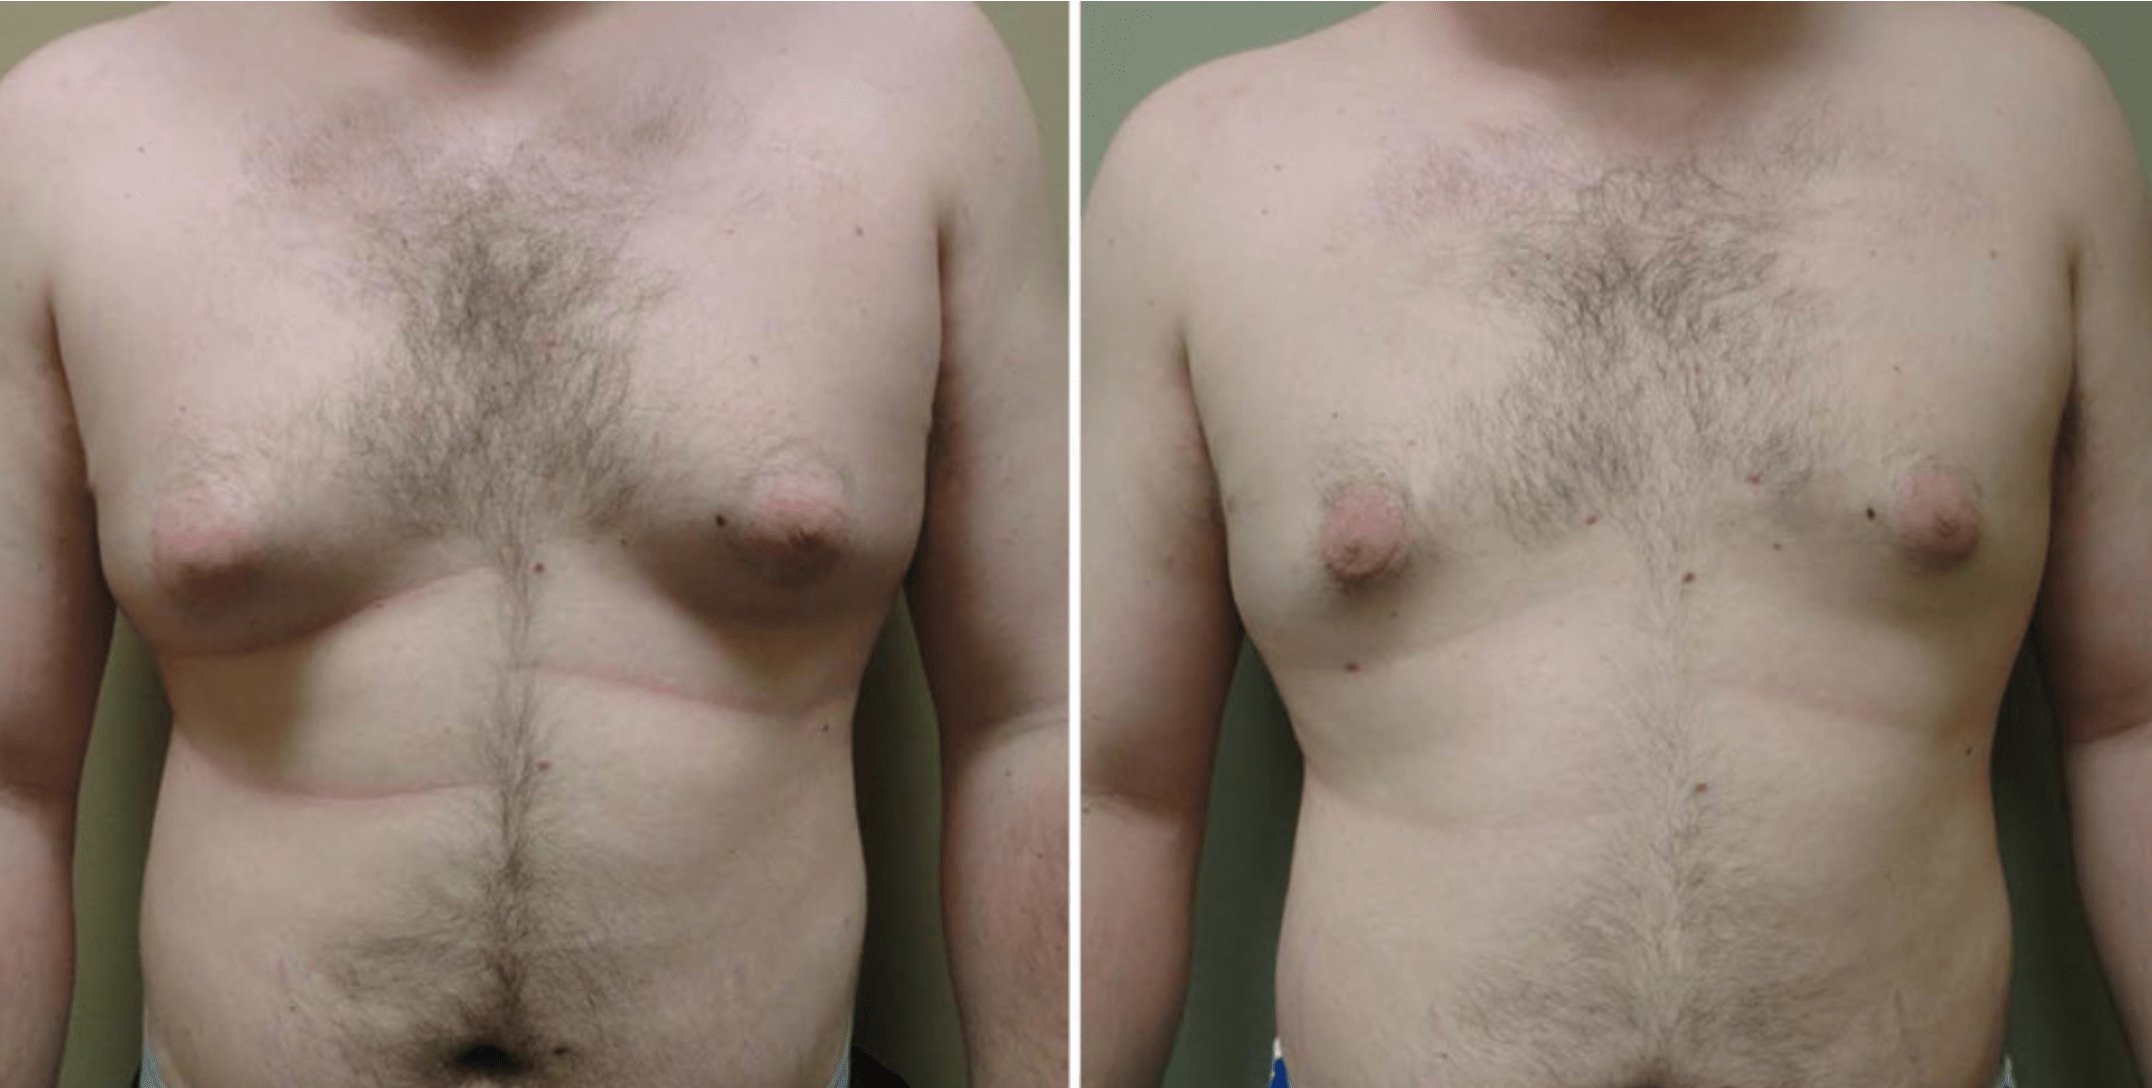 Patient's chest before and after male breast liposuction.